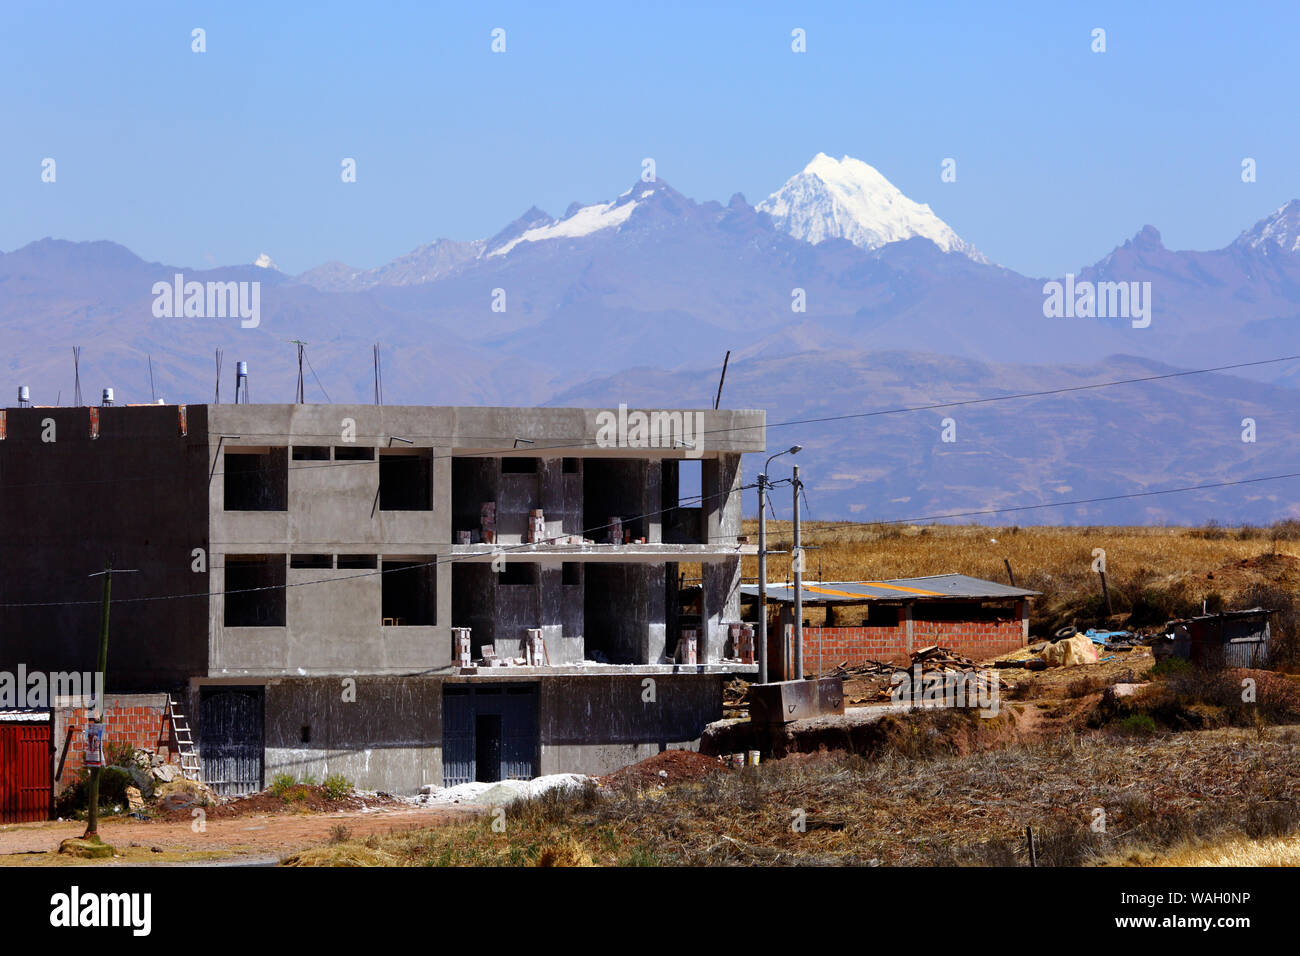 Buildings under construction at Nuevo Chinchero, near the original village of Chinchero, financed by compensation for land bought by the government from familiies for the construction of a new airport for Cusco and Machu Picchu. Mt Salcantay is in the background. Cusco Region, Peru Stock Photo